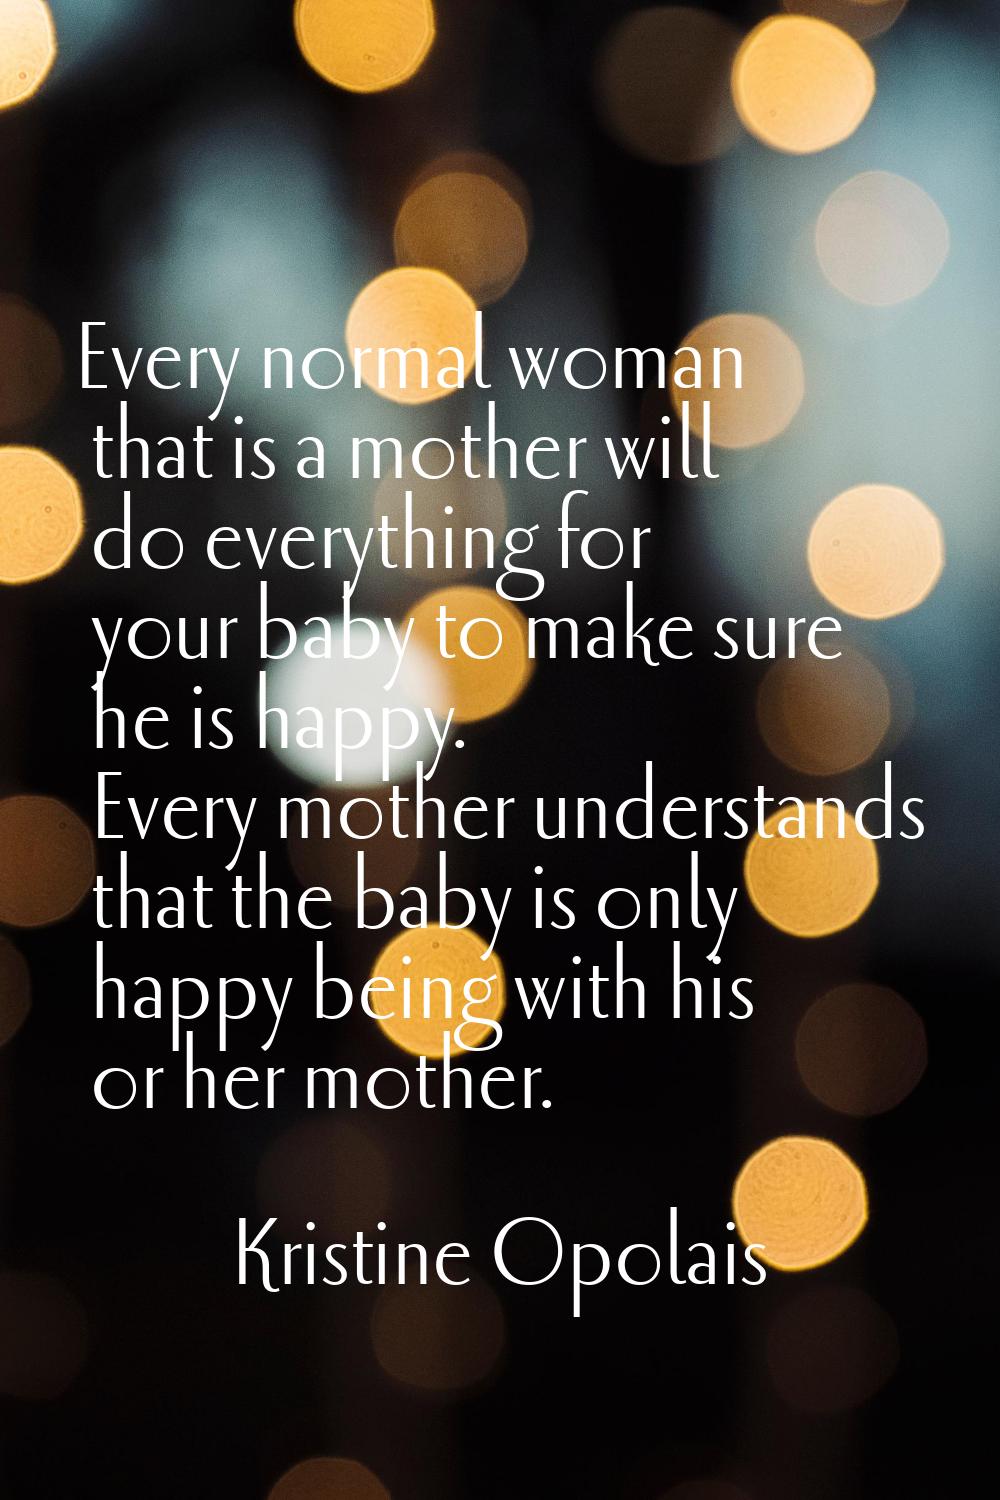 Every normal woman that is a mother will do everything for your baby to make sure he is happy. Ever